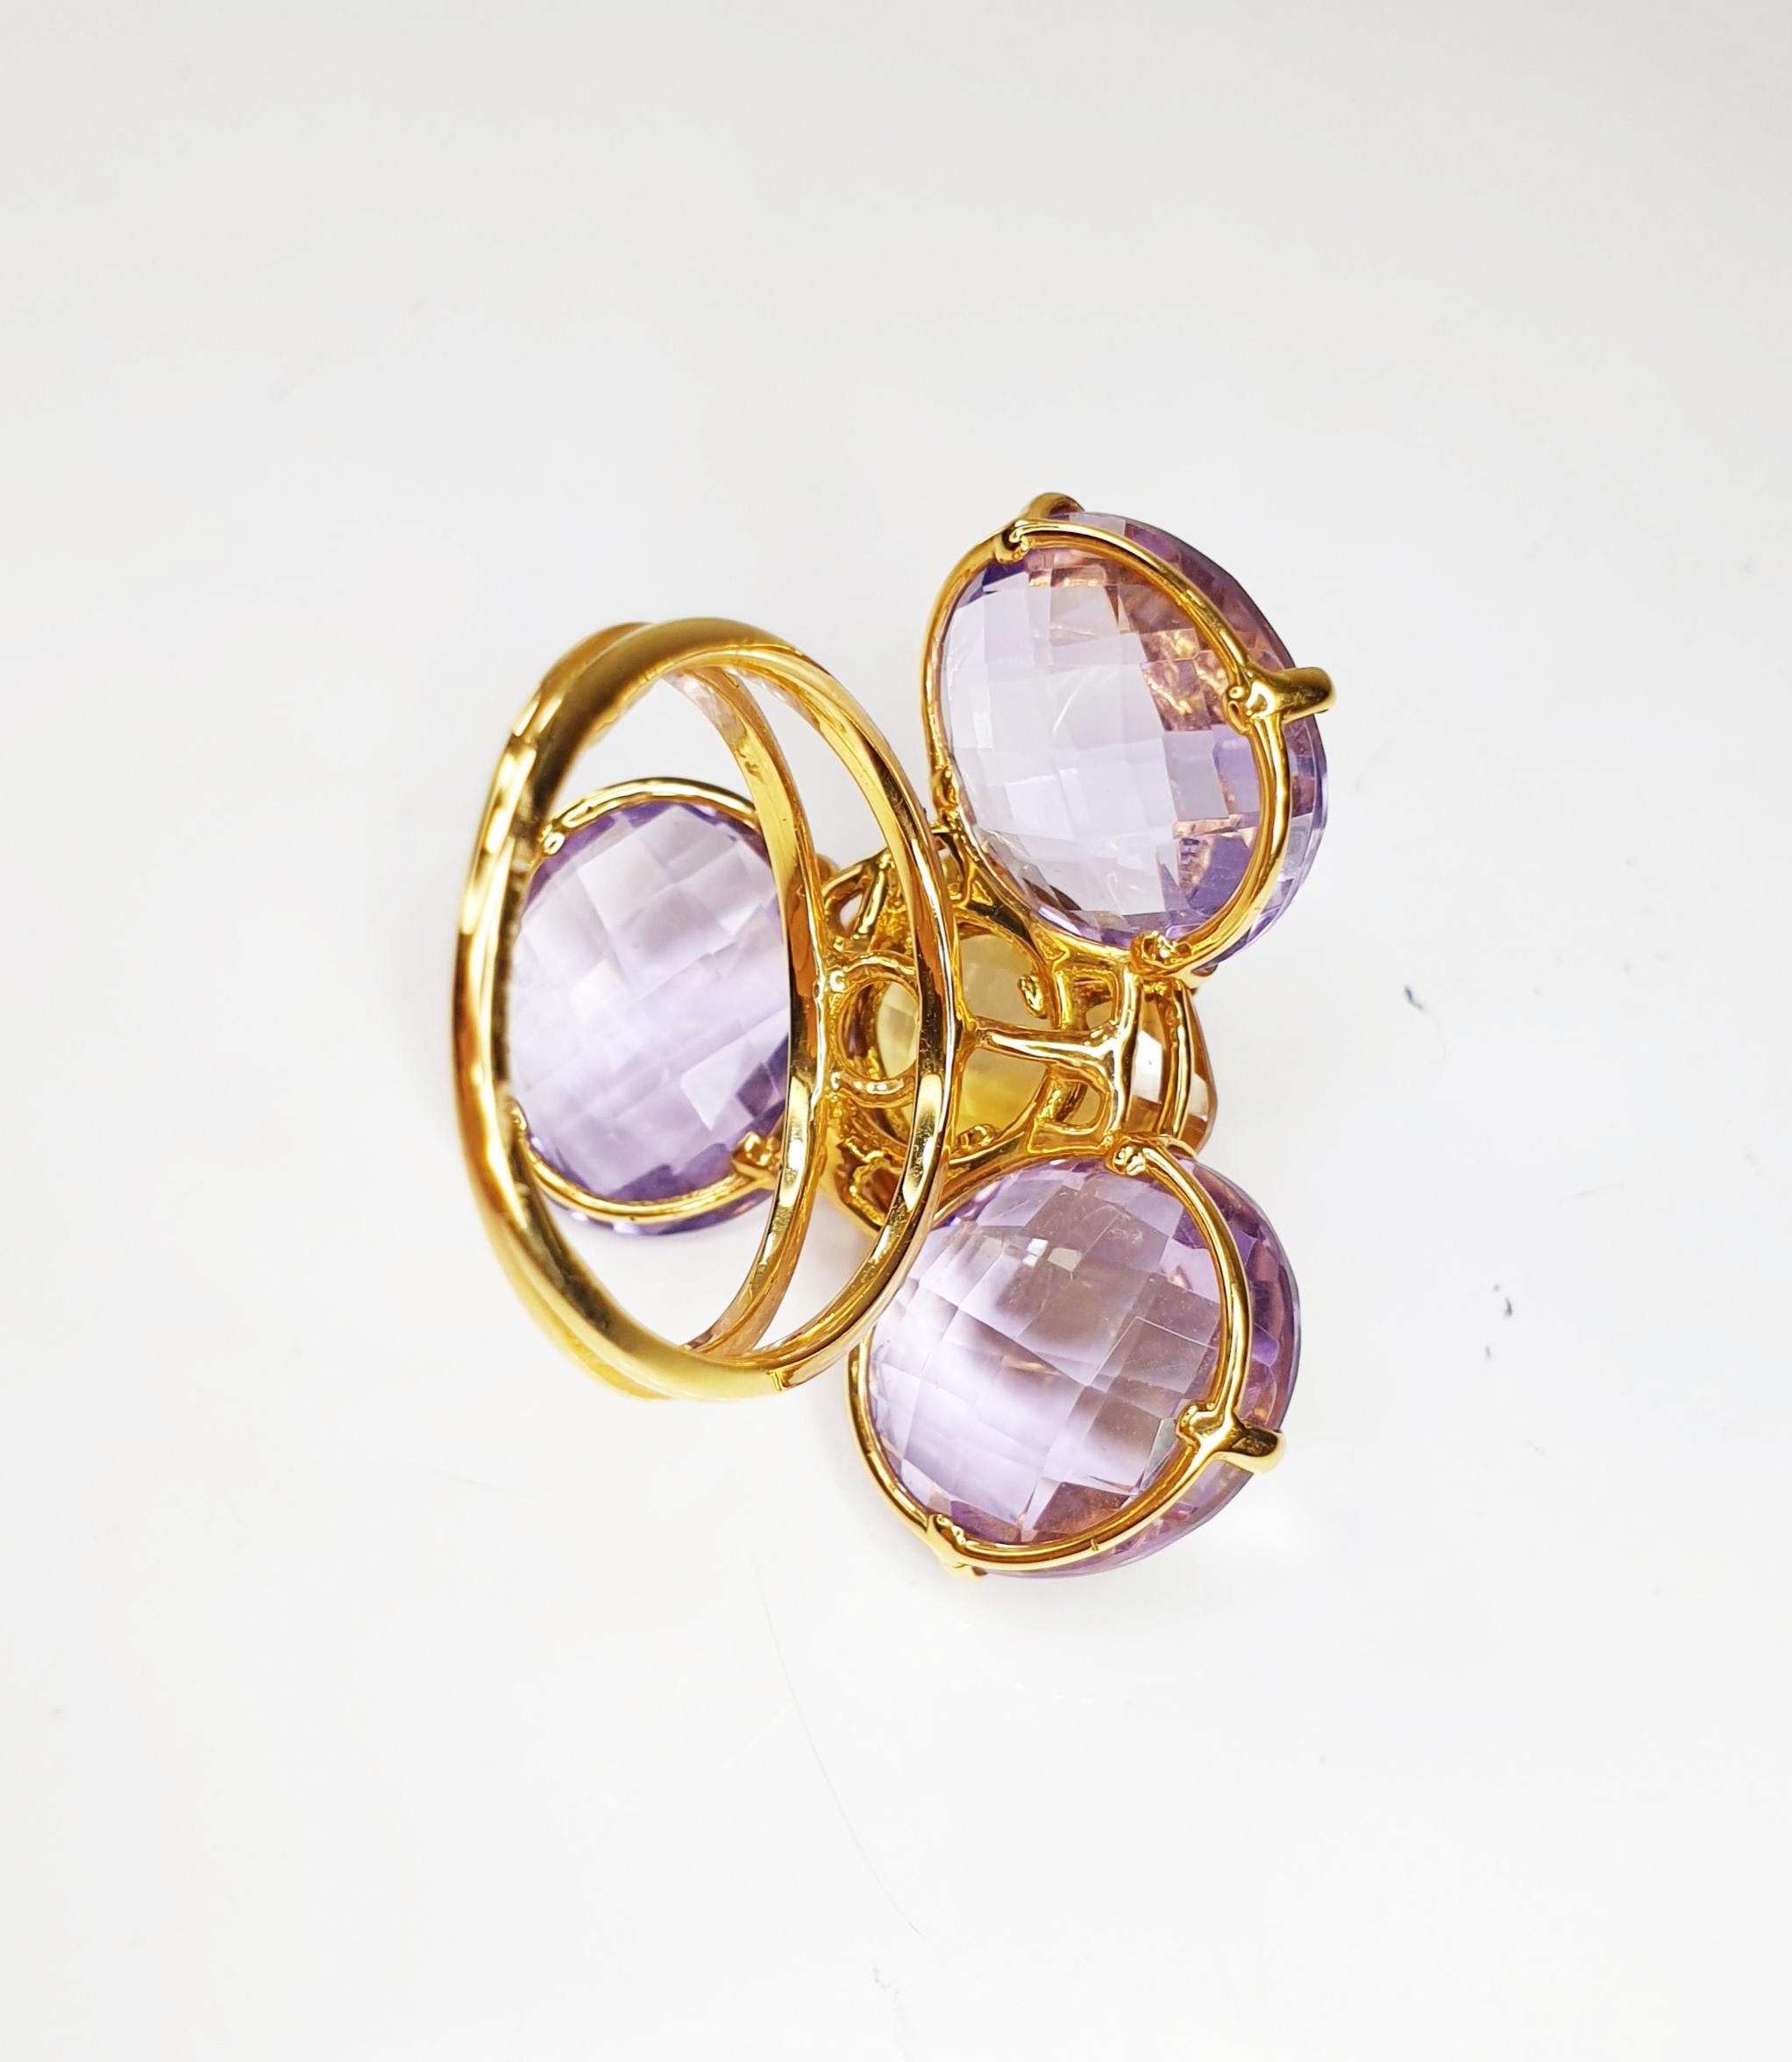 Women's Multiphaceted Flower Ring with Central Citrine and Three Amethysts For Sale